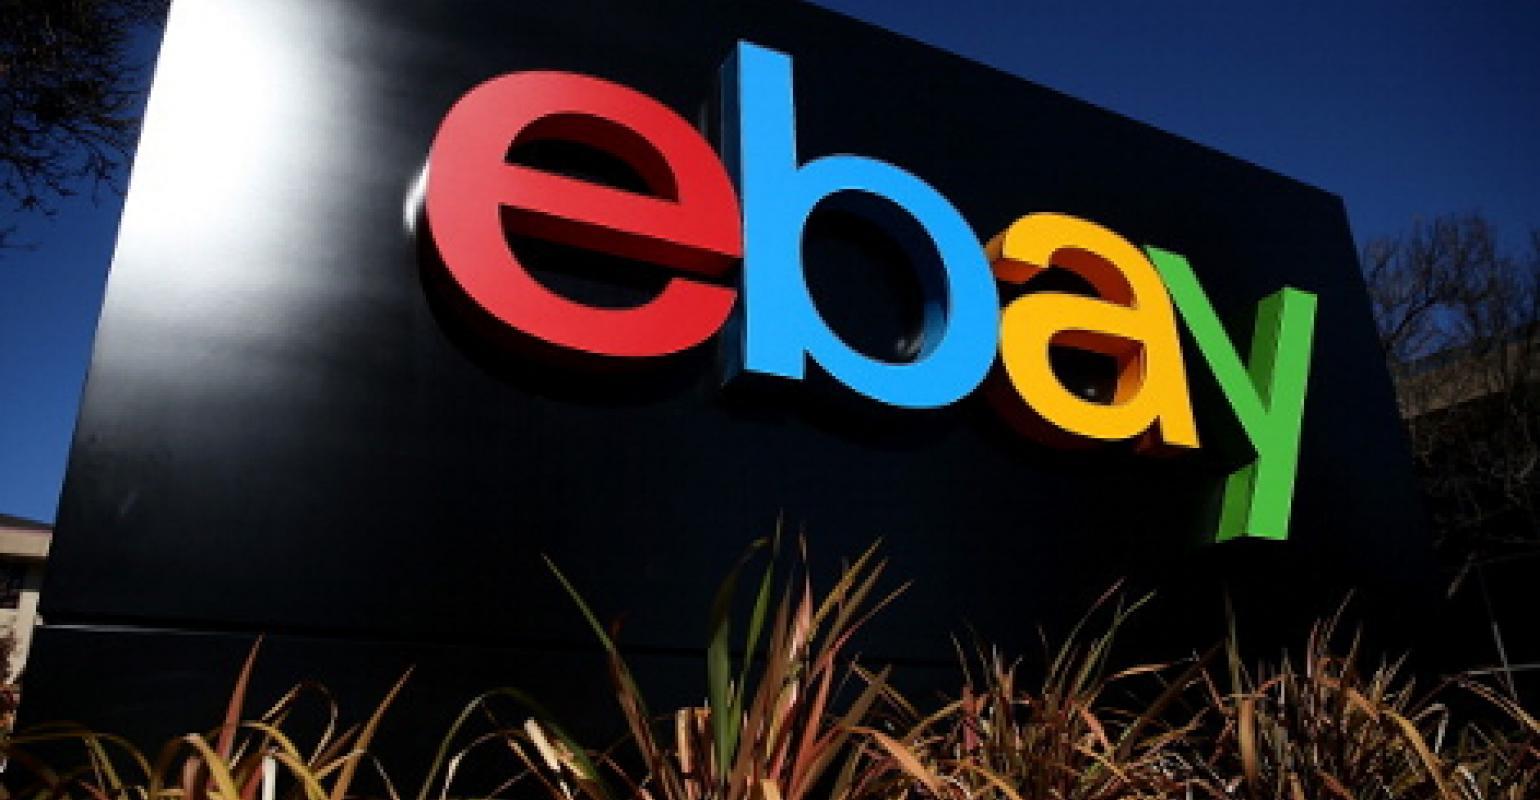 Supernap Logo - eBay May Build Reno Data Center Beside Leased Space at Switch